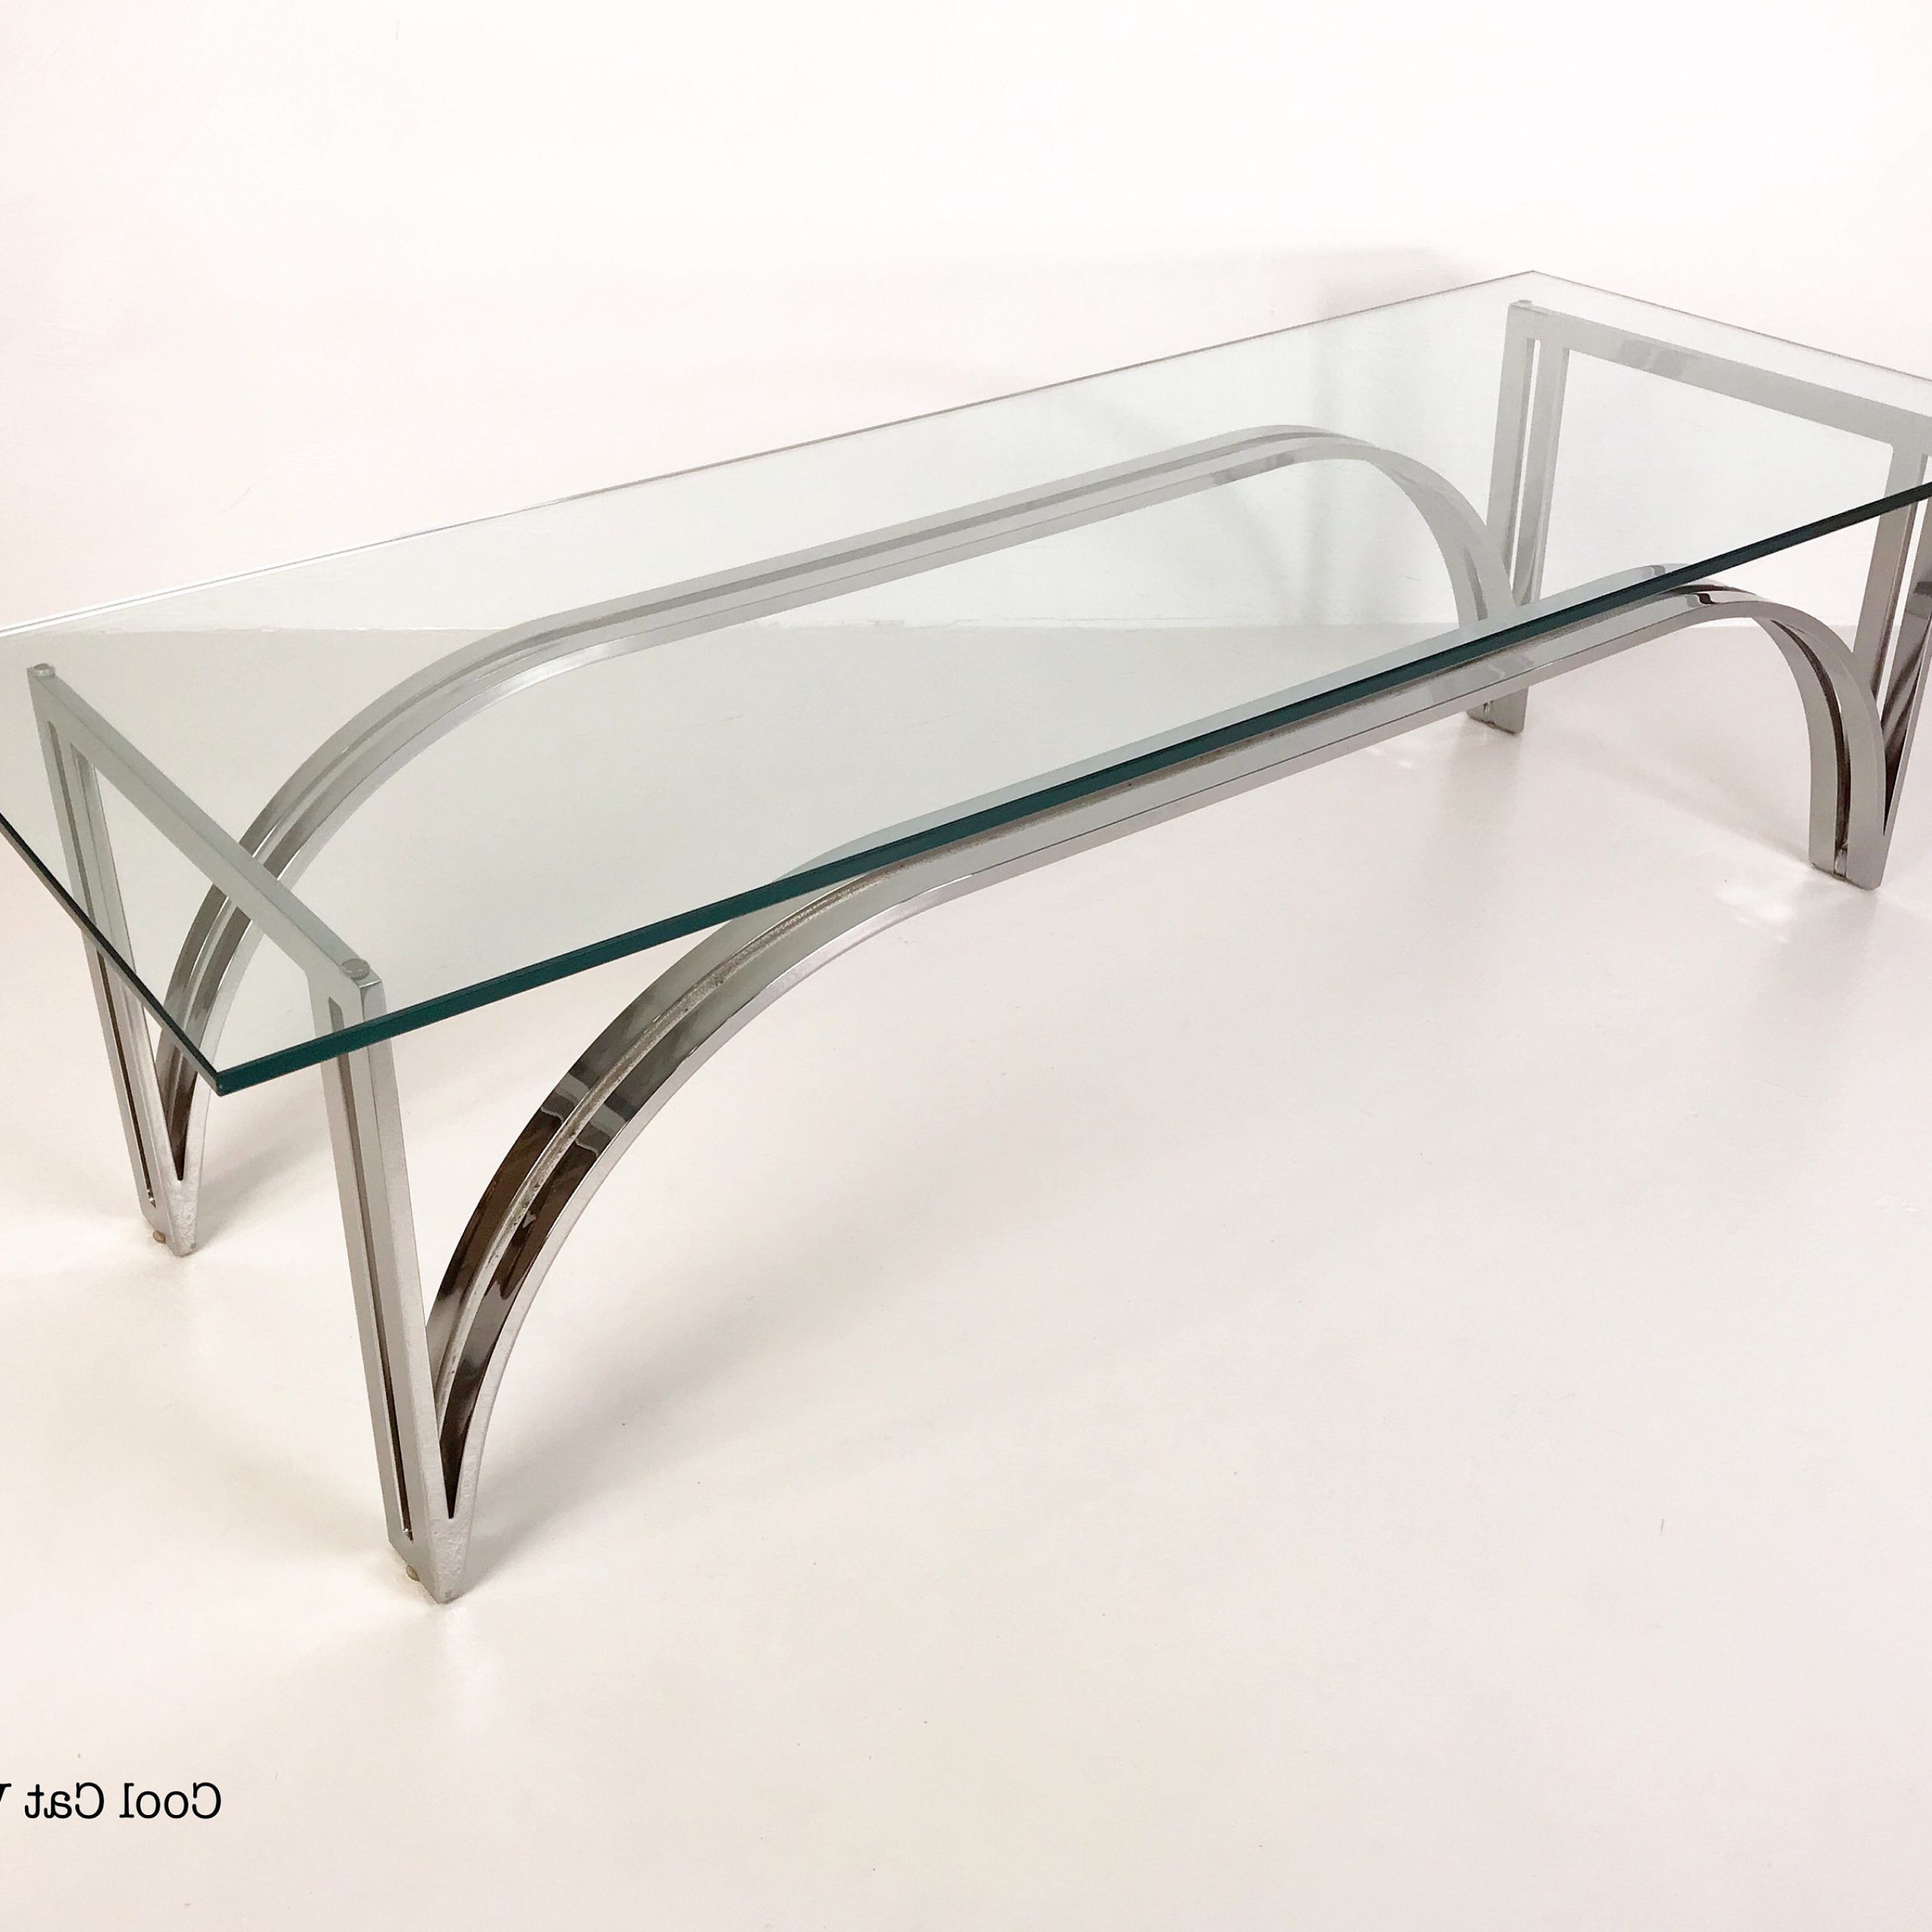 Chrome And Glass Rectangular Coffee Tables Pertaining To Newest Modern Rectangular Chrome Glass Top Coffee Table, Circa Late 1960s (View 2 of 10)